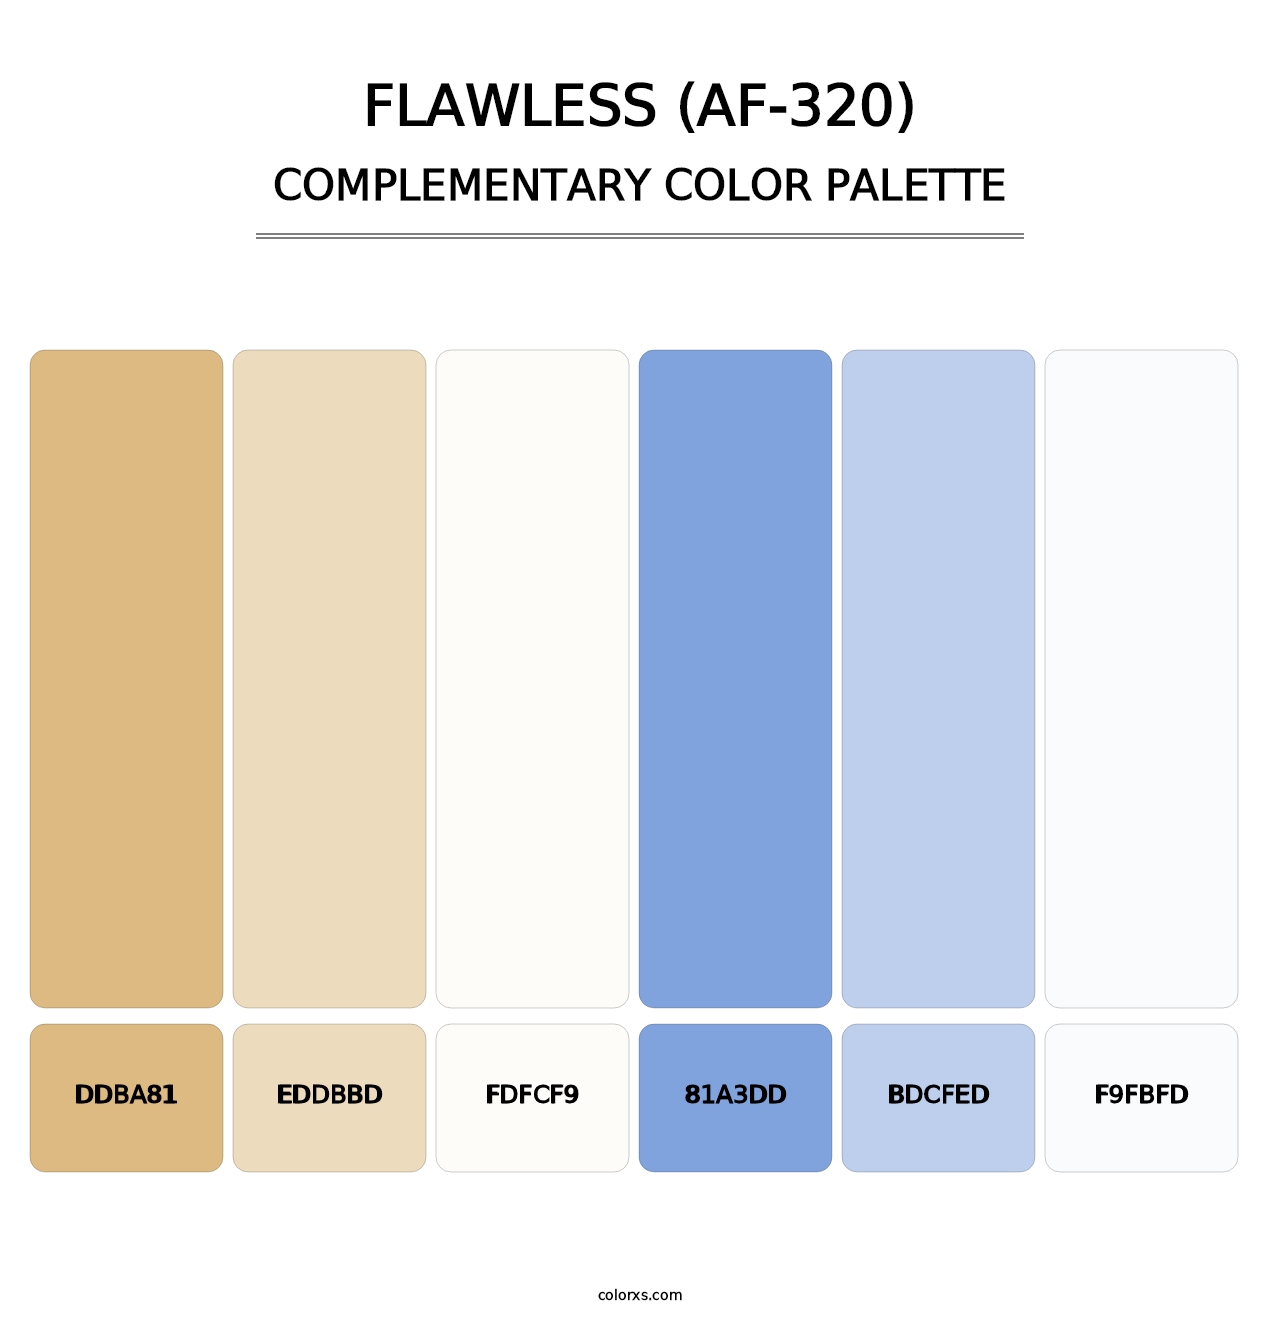 Flawless (AF-320) - Complementary Color Palette